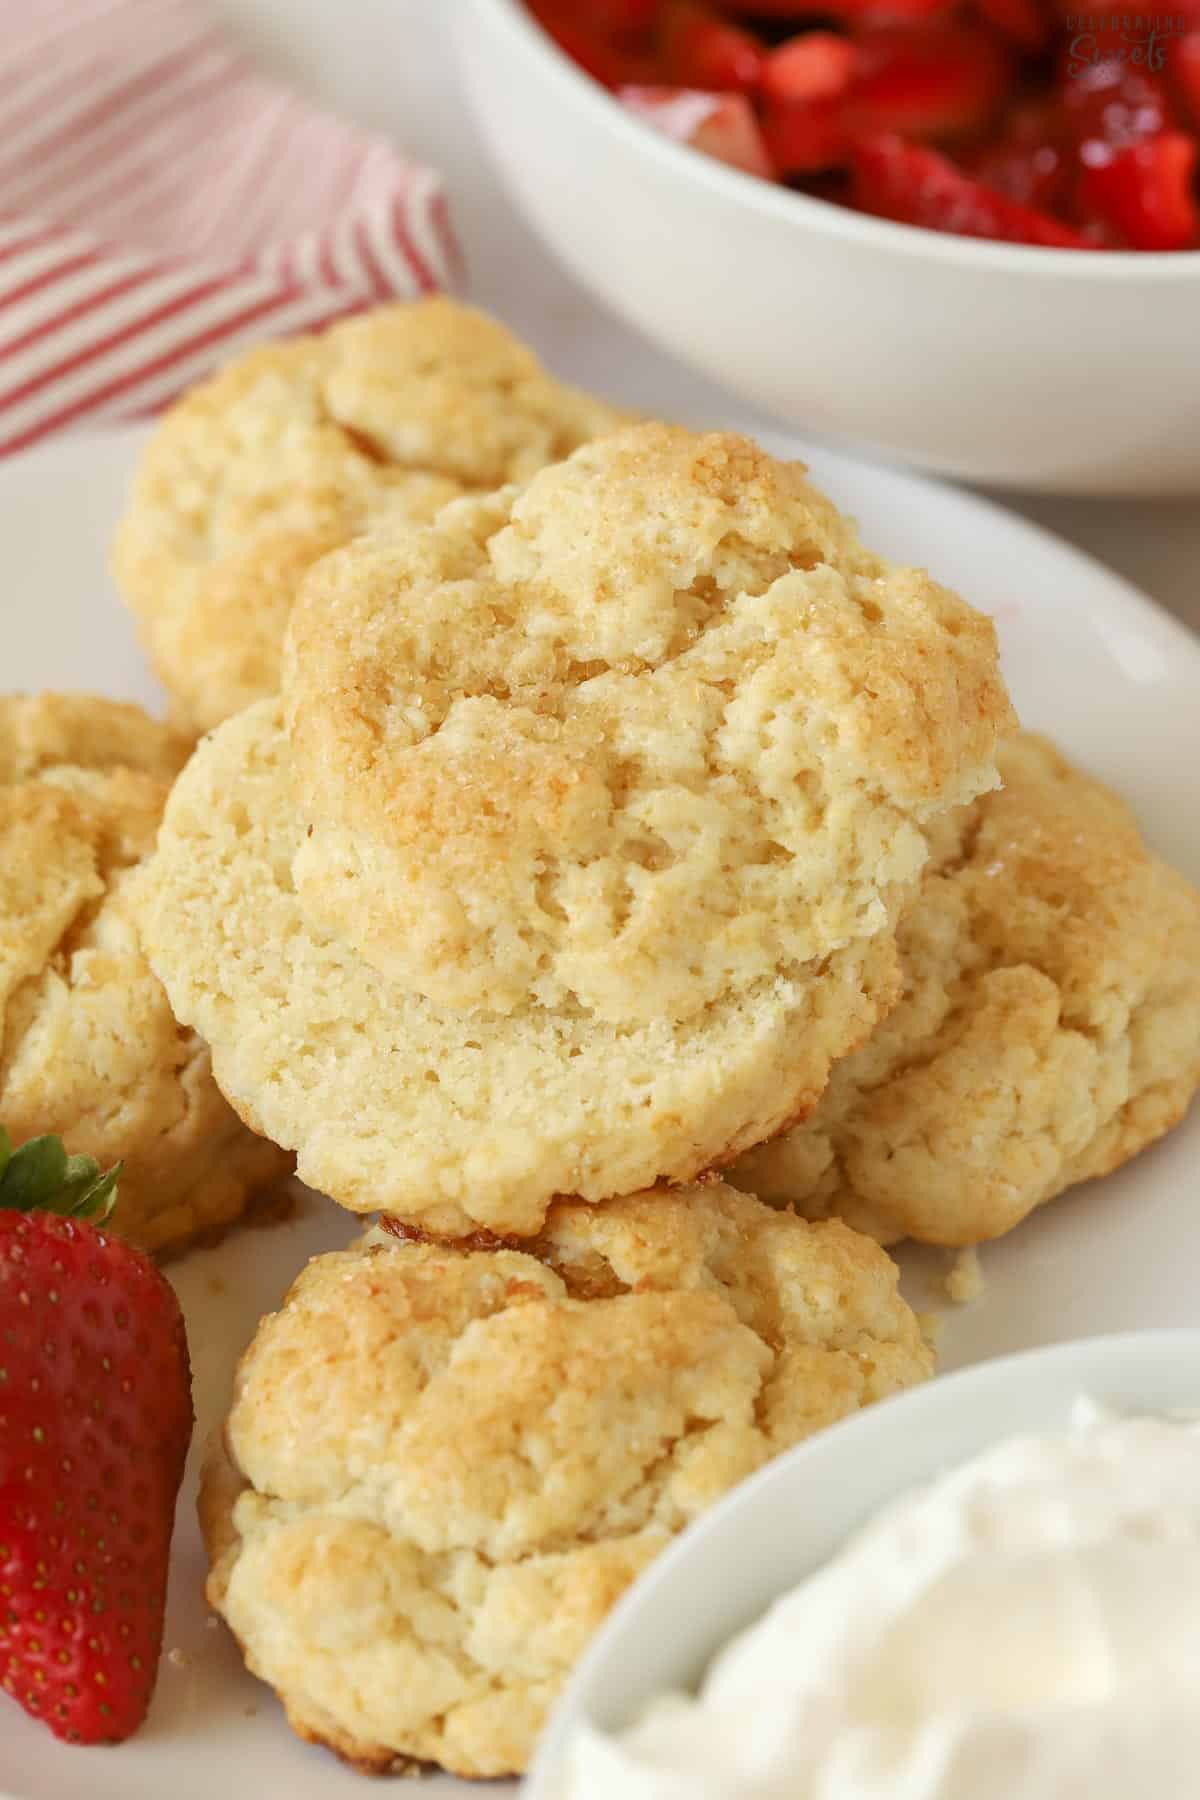 Strawberry shortcake biscuits on a white plate next to strawberries and whipped cream.